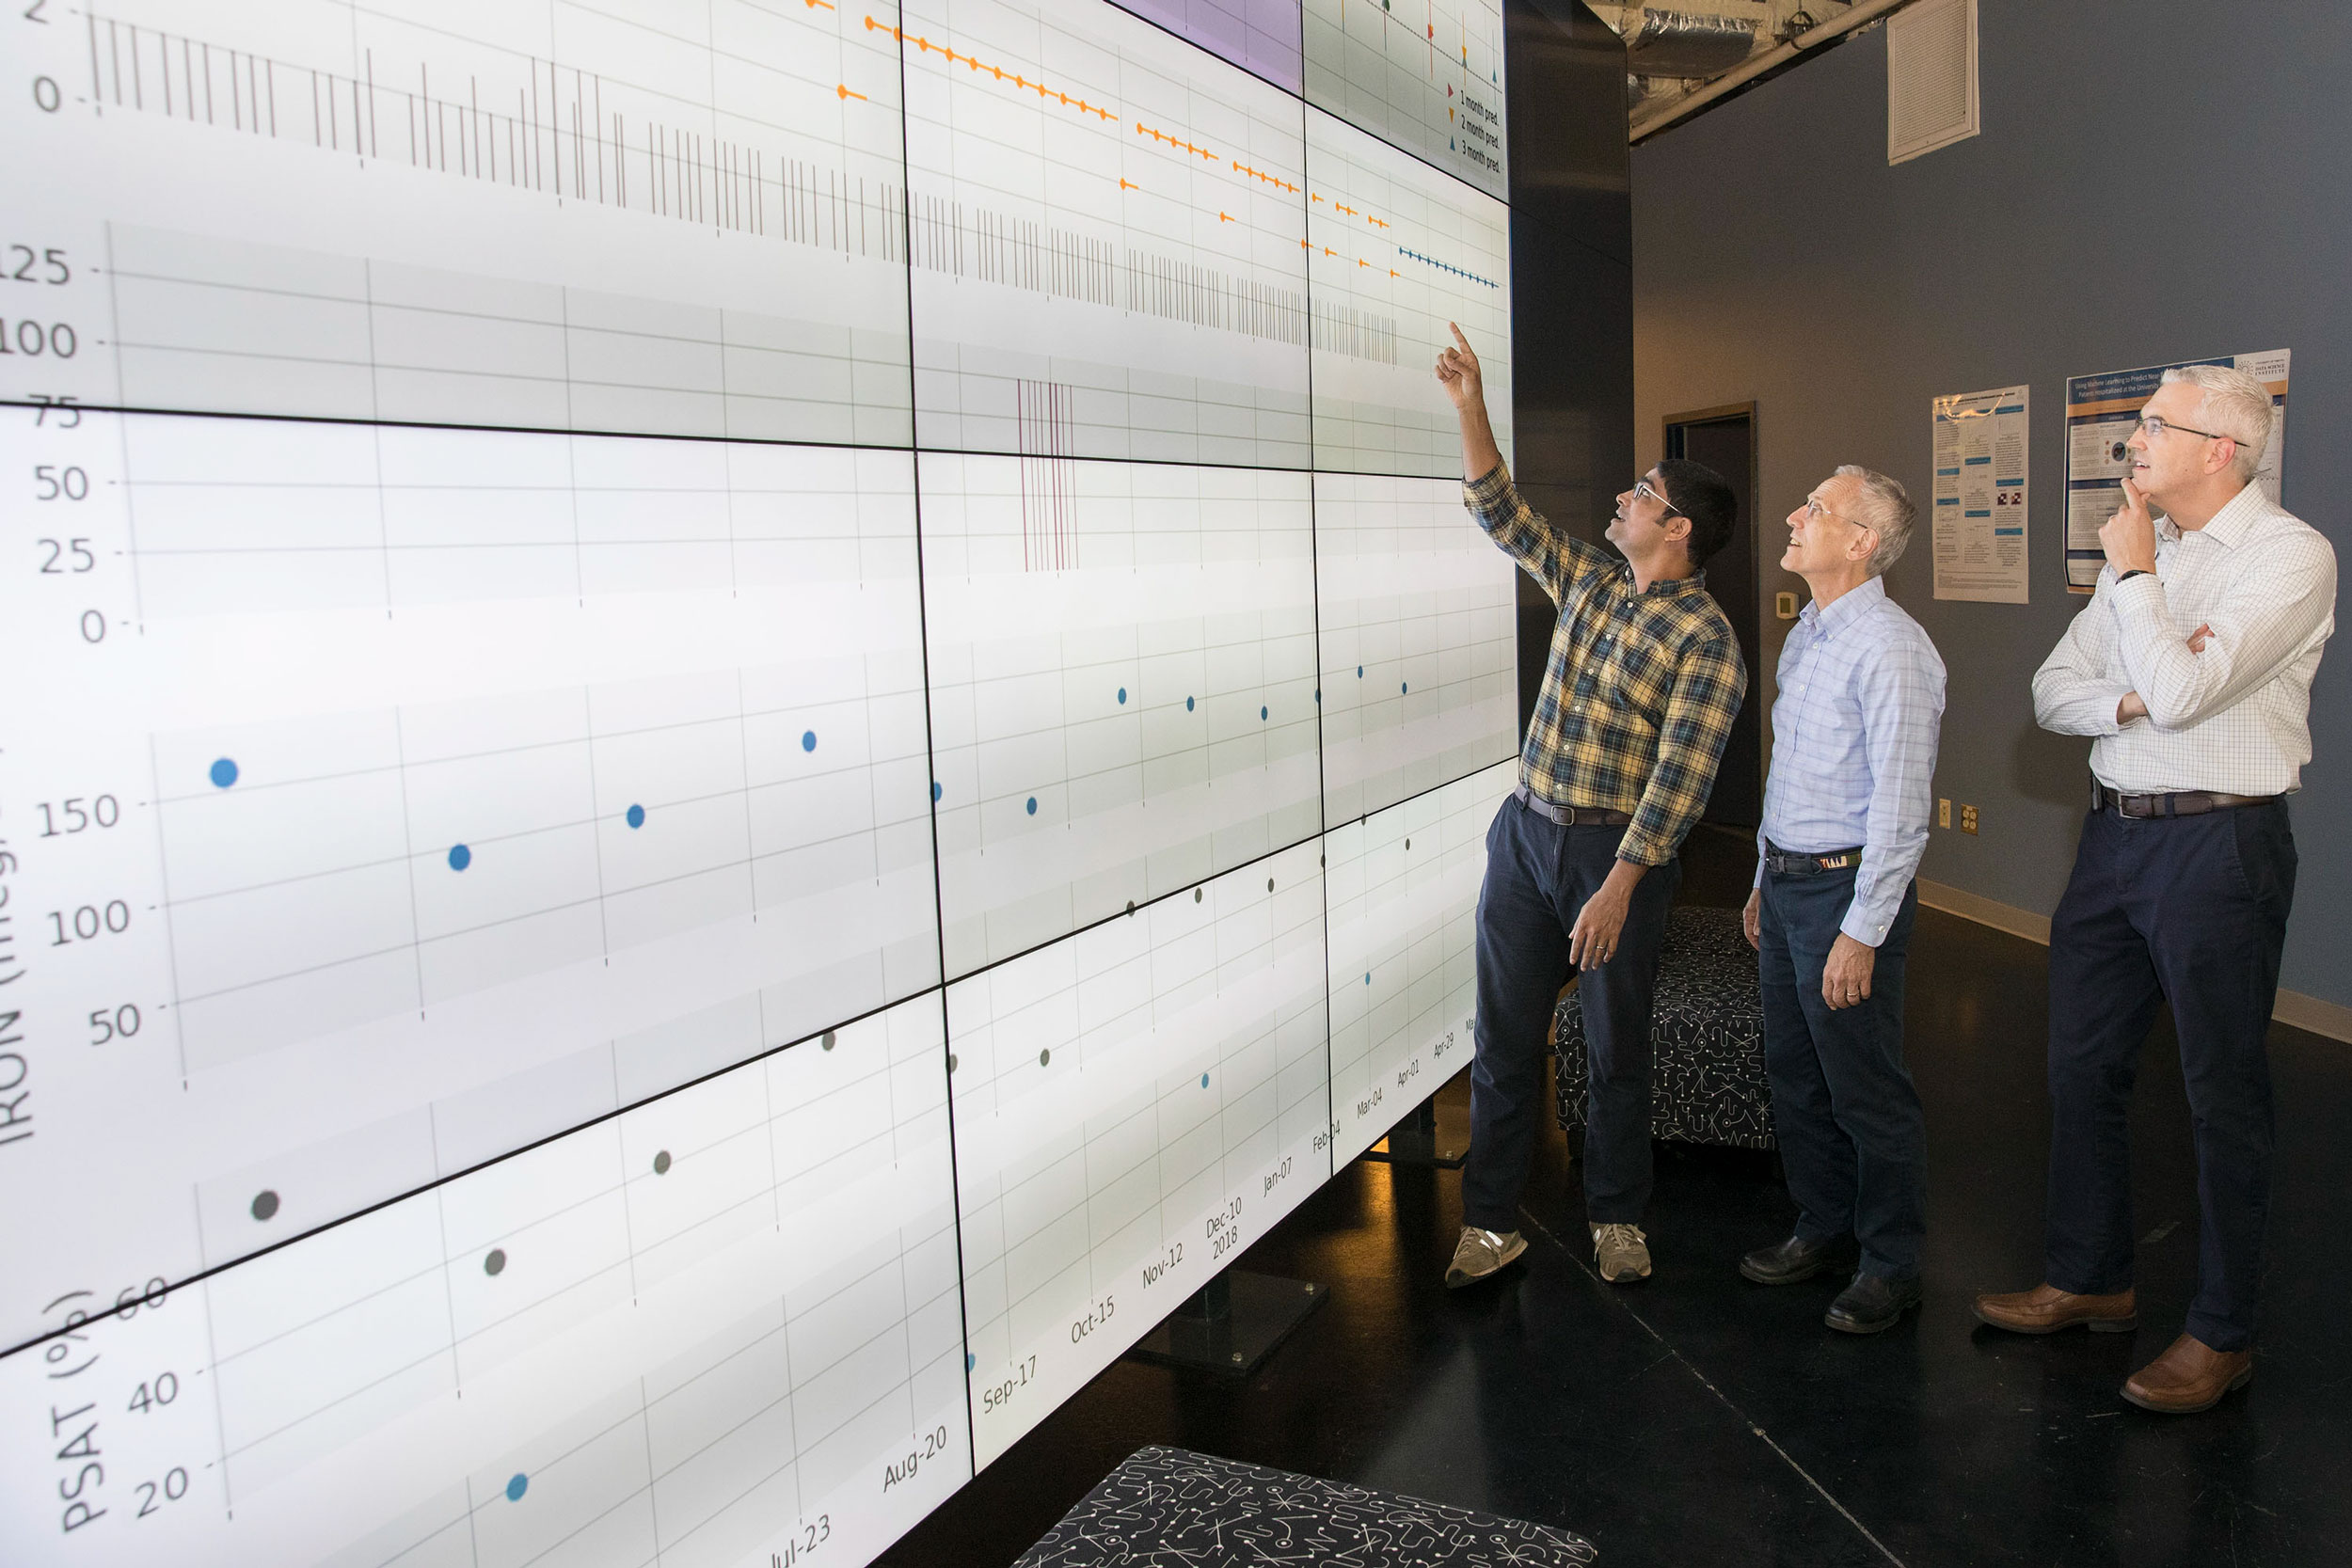 Data scientists Benjamin Lobo, left, and Don Brown, center,  Dr. Brendan Bowman, right look at data on a digital wall